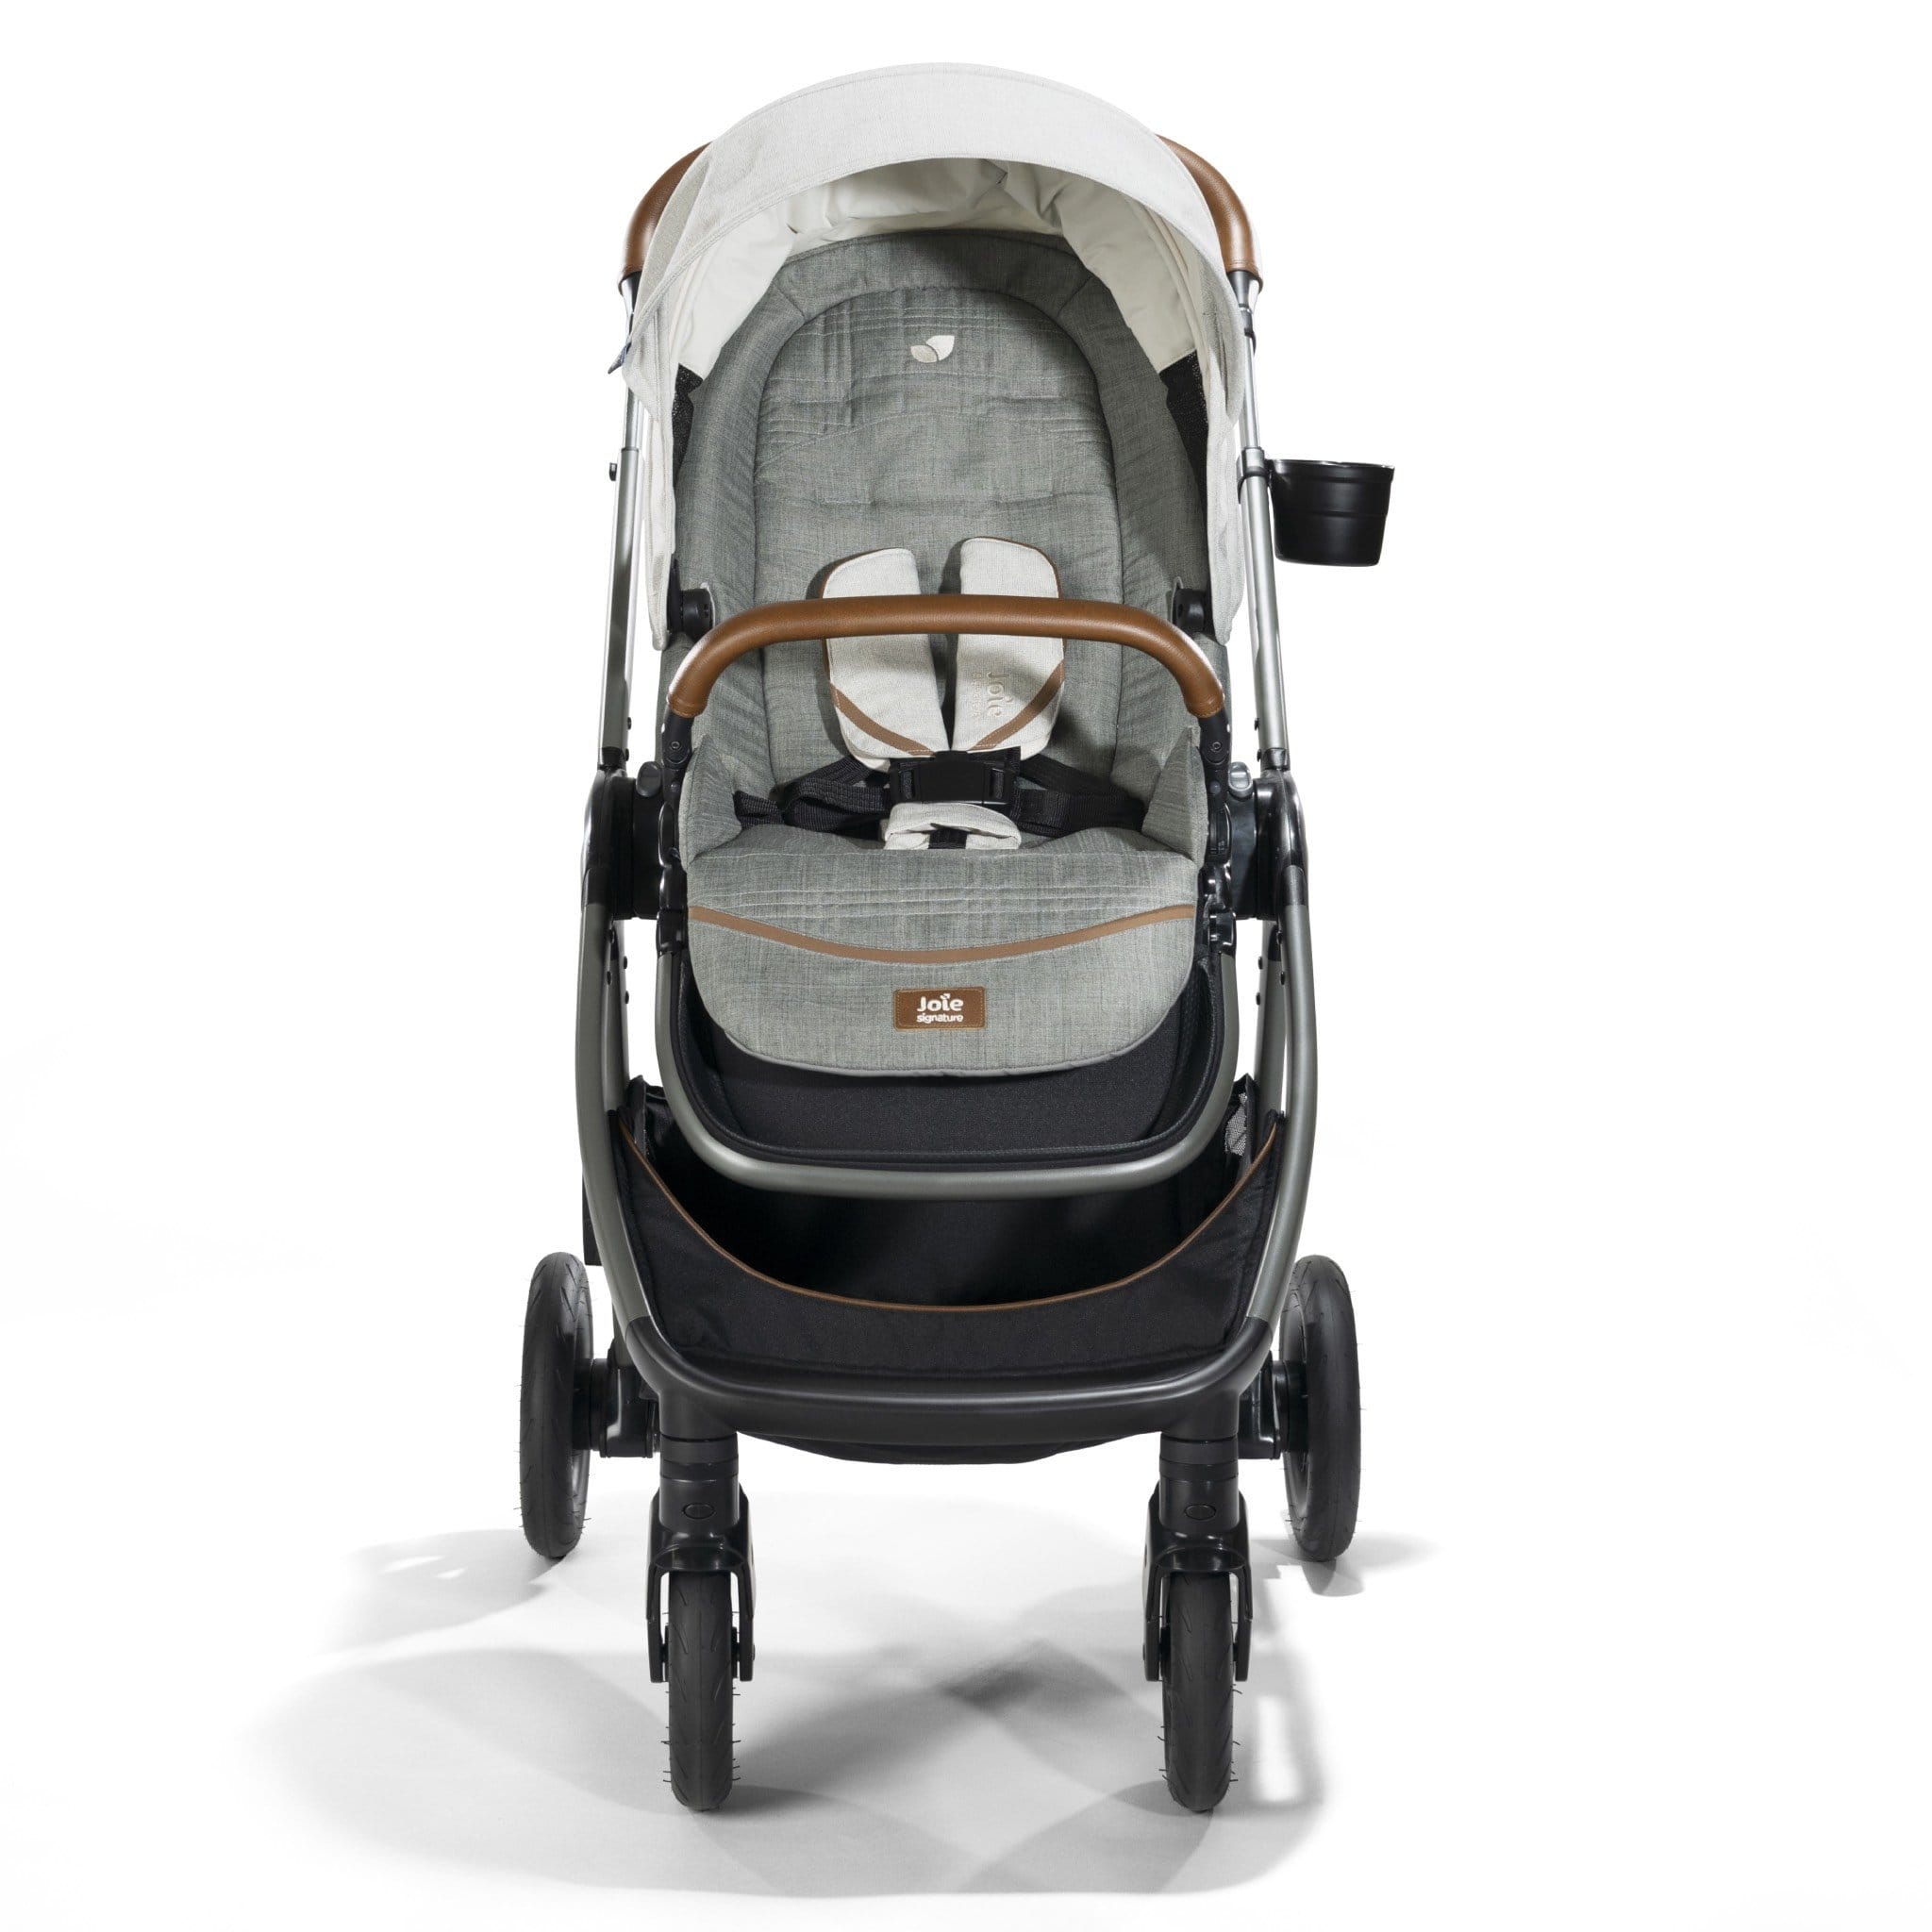 Joie baby prams Joie Finiti 4in1 Signature Edition Pram Oyster S1606AAOYS000